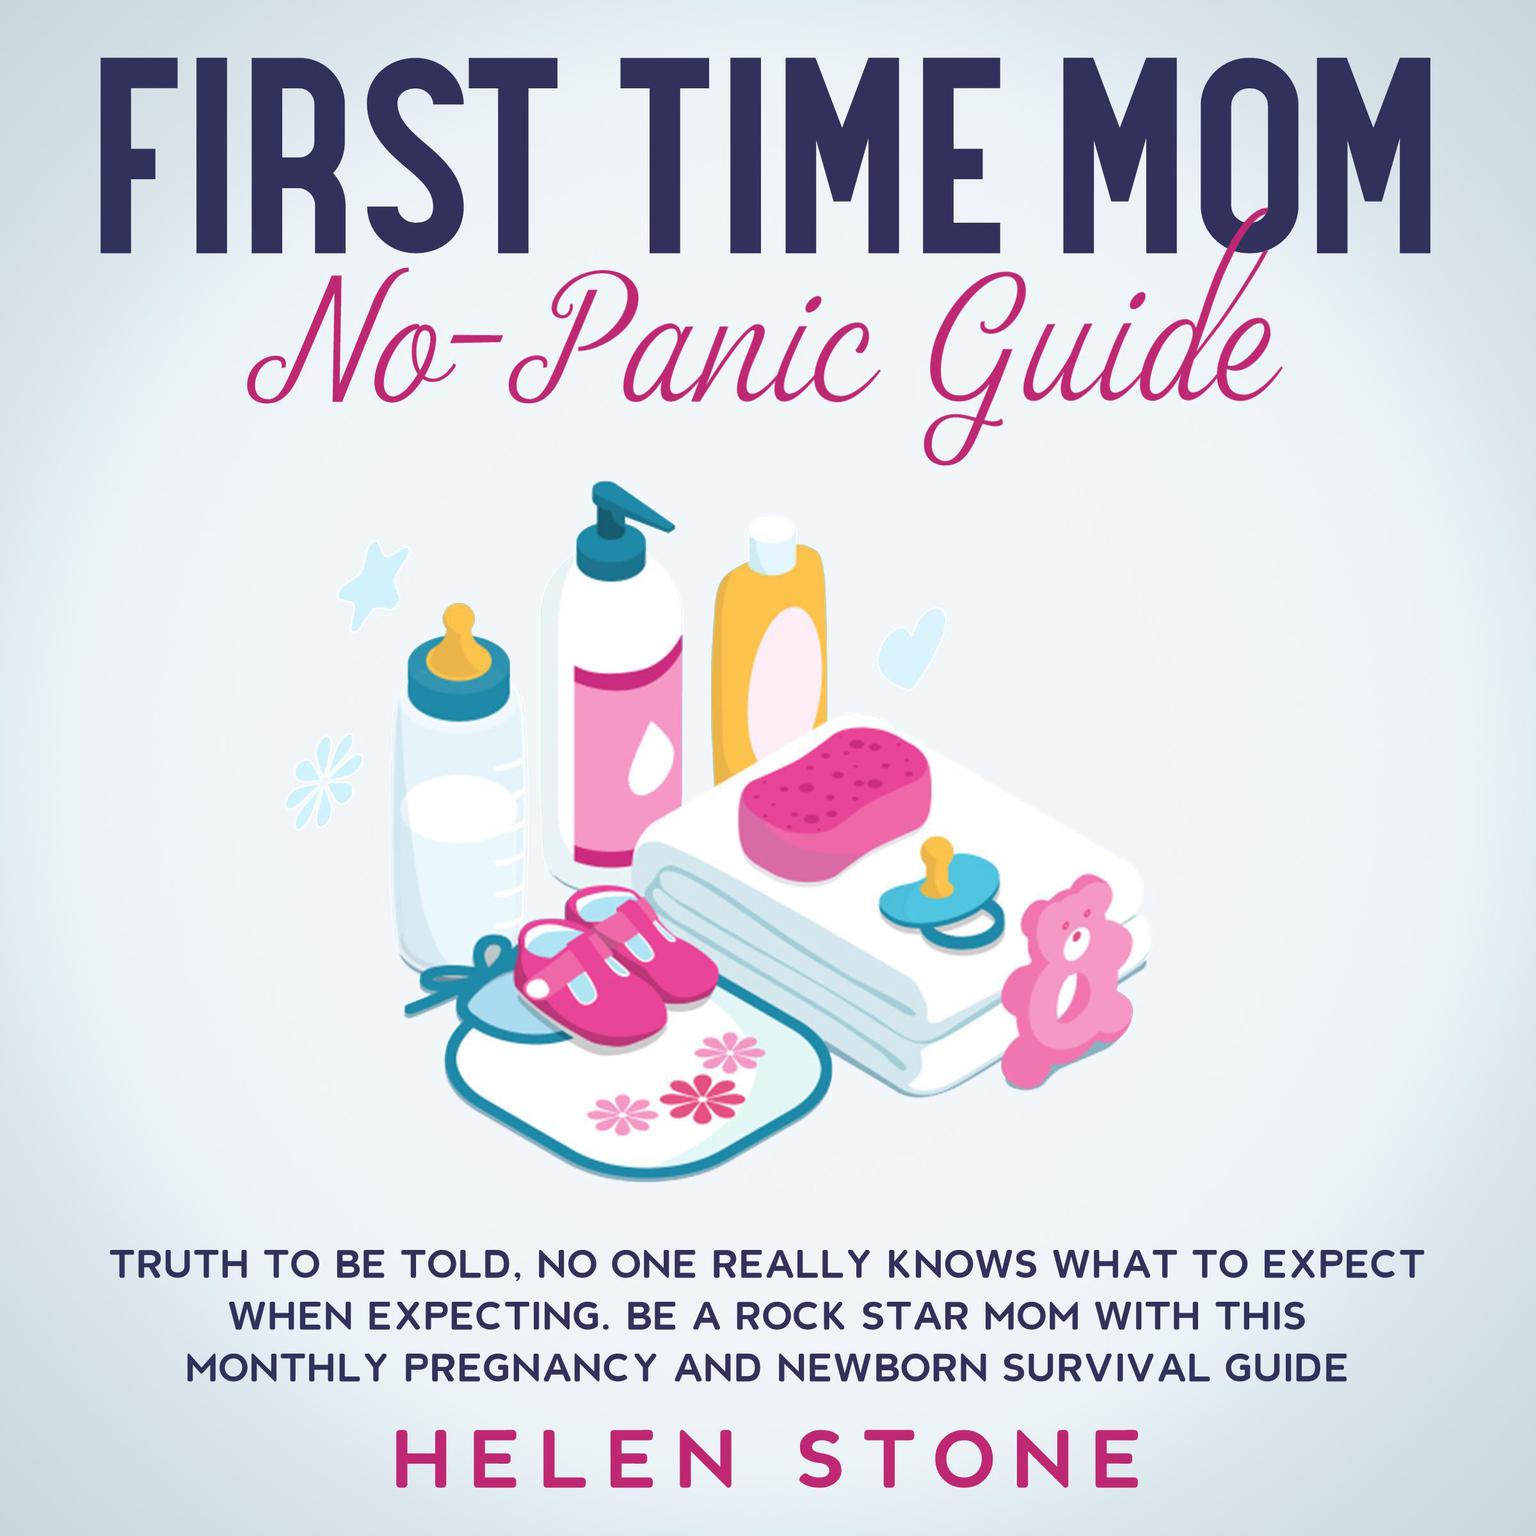 First Time Mom No-Panic Guide: Truth to be Told, No One Really Knows What to Expect When Expecting. Be a Rock Star Mom with This Monthly Pregnancy and Newborn Survival Guide Audiobook, by Helen Stone